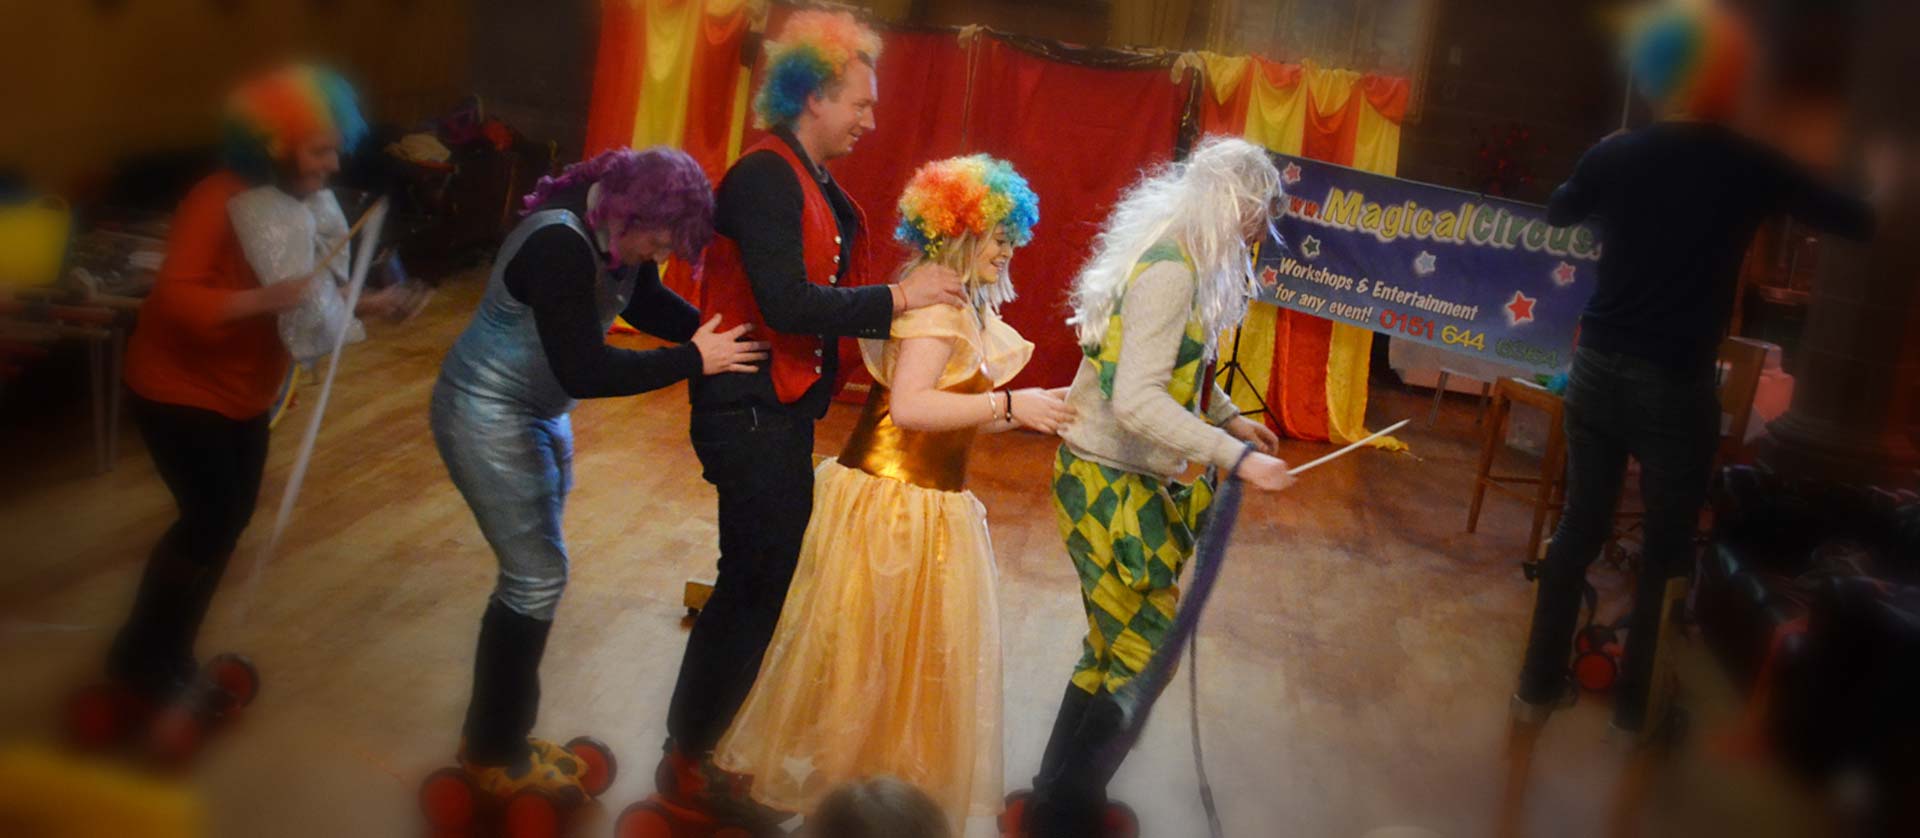 Magical Circus corporate team building events.